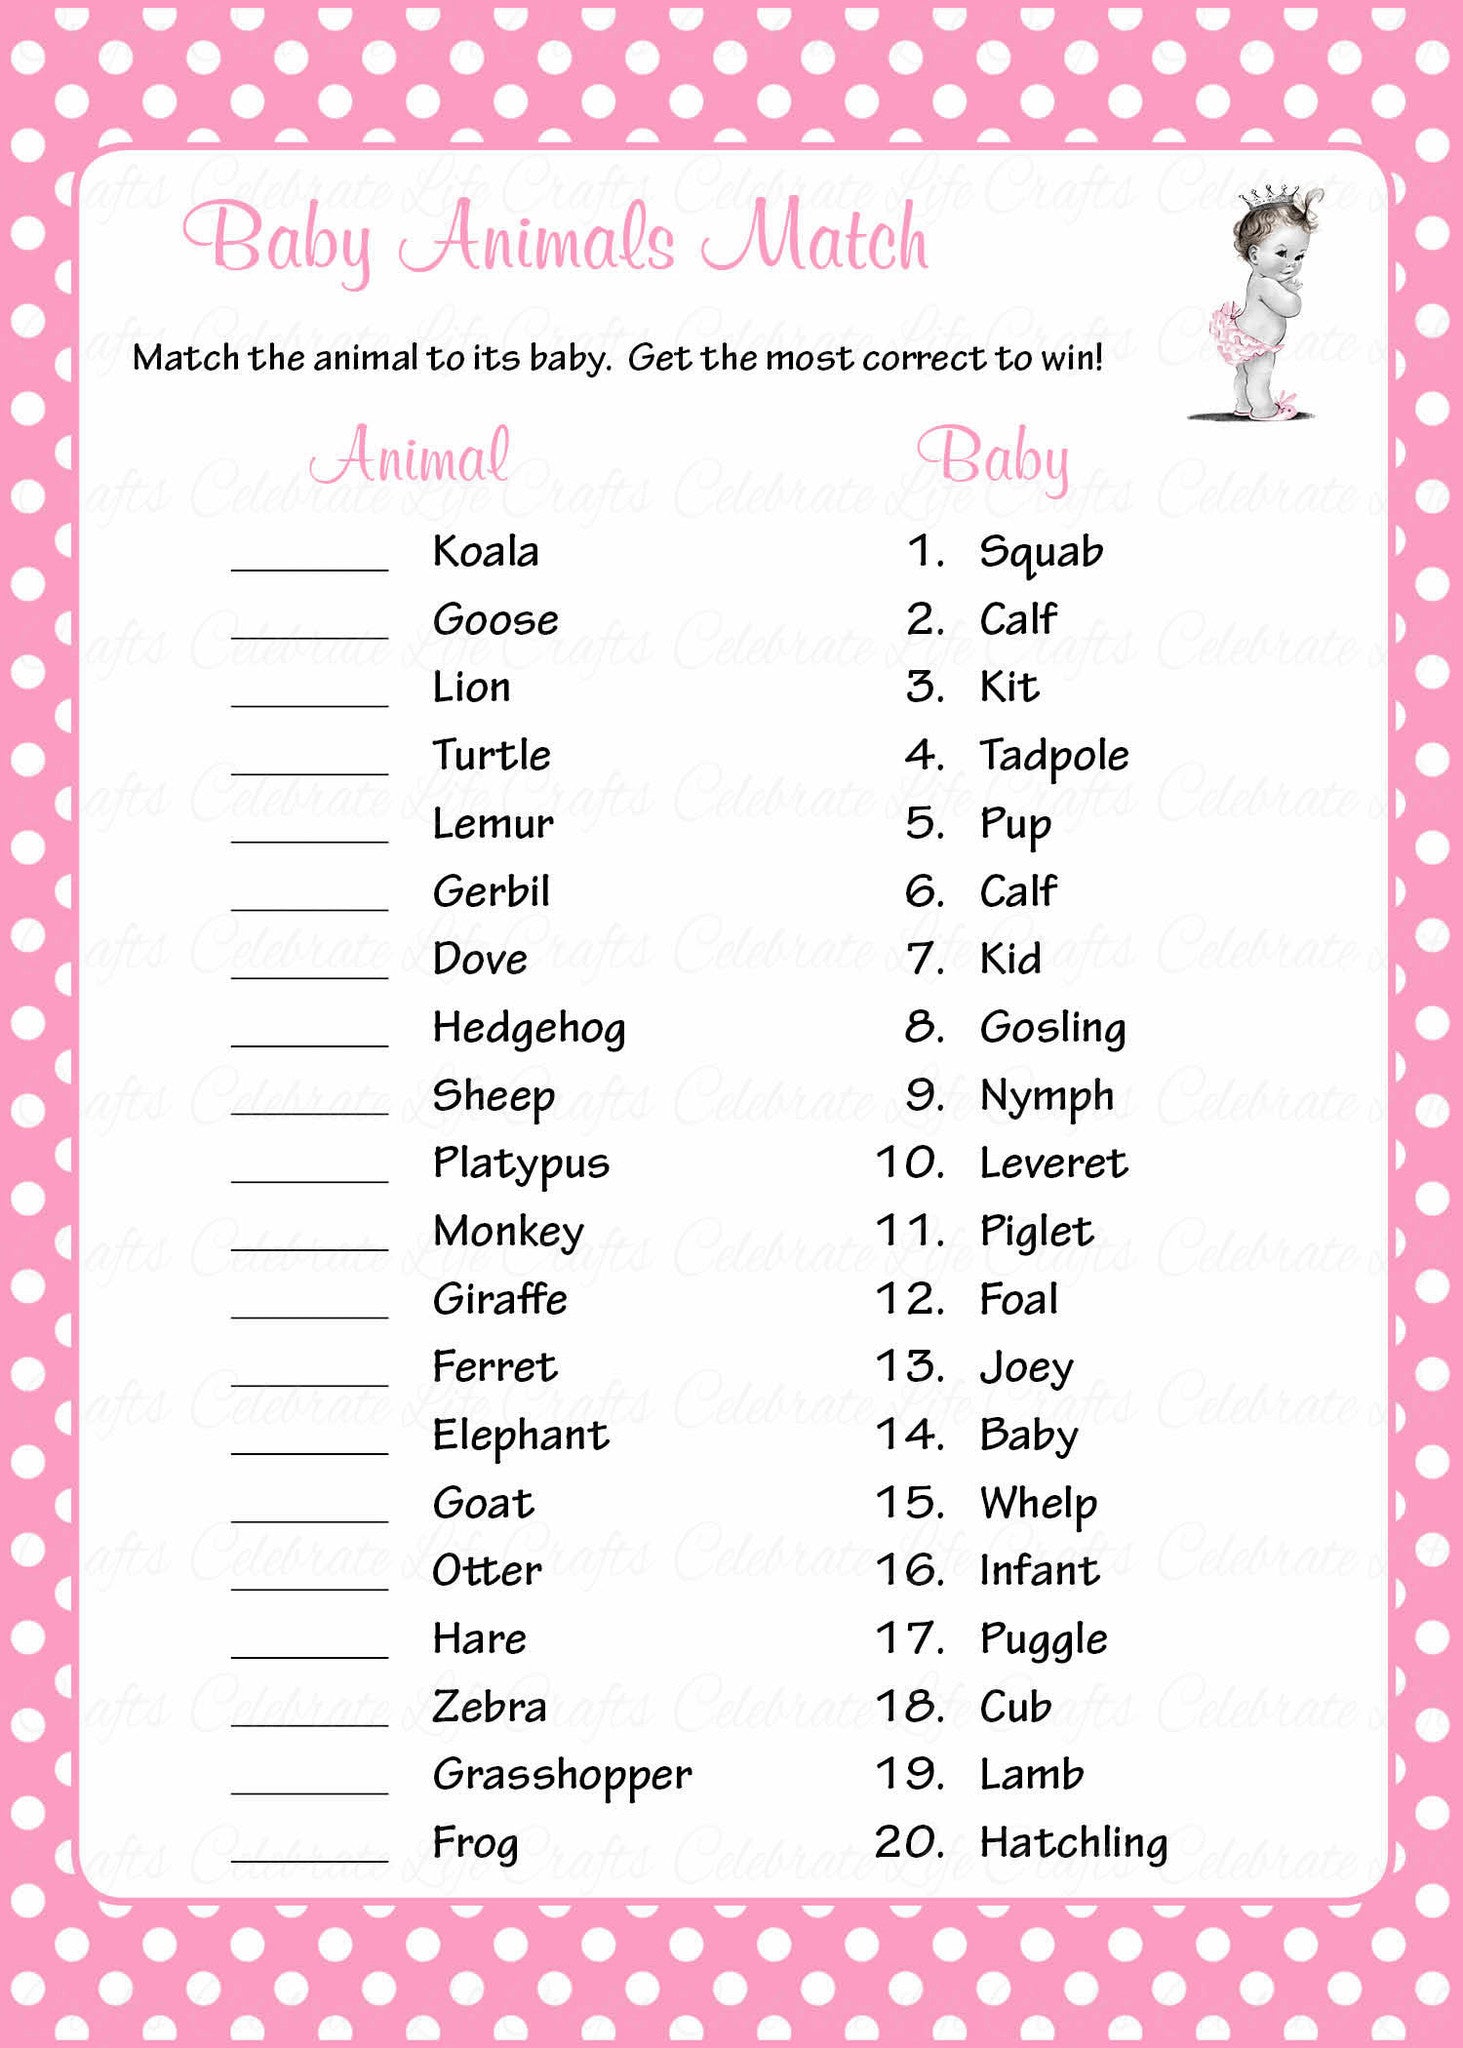 baby-animals-match-baby-shower-game-princess-baby-shower-theme-for-baby-girl-pink